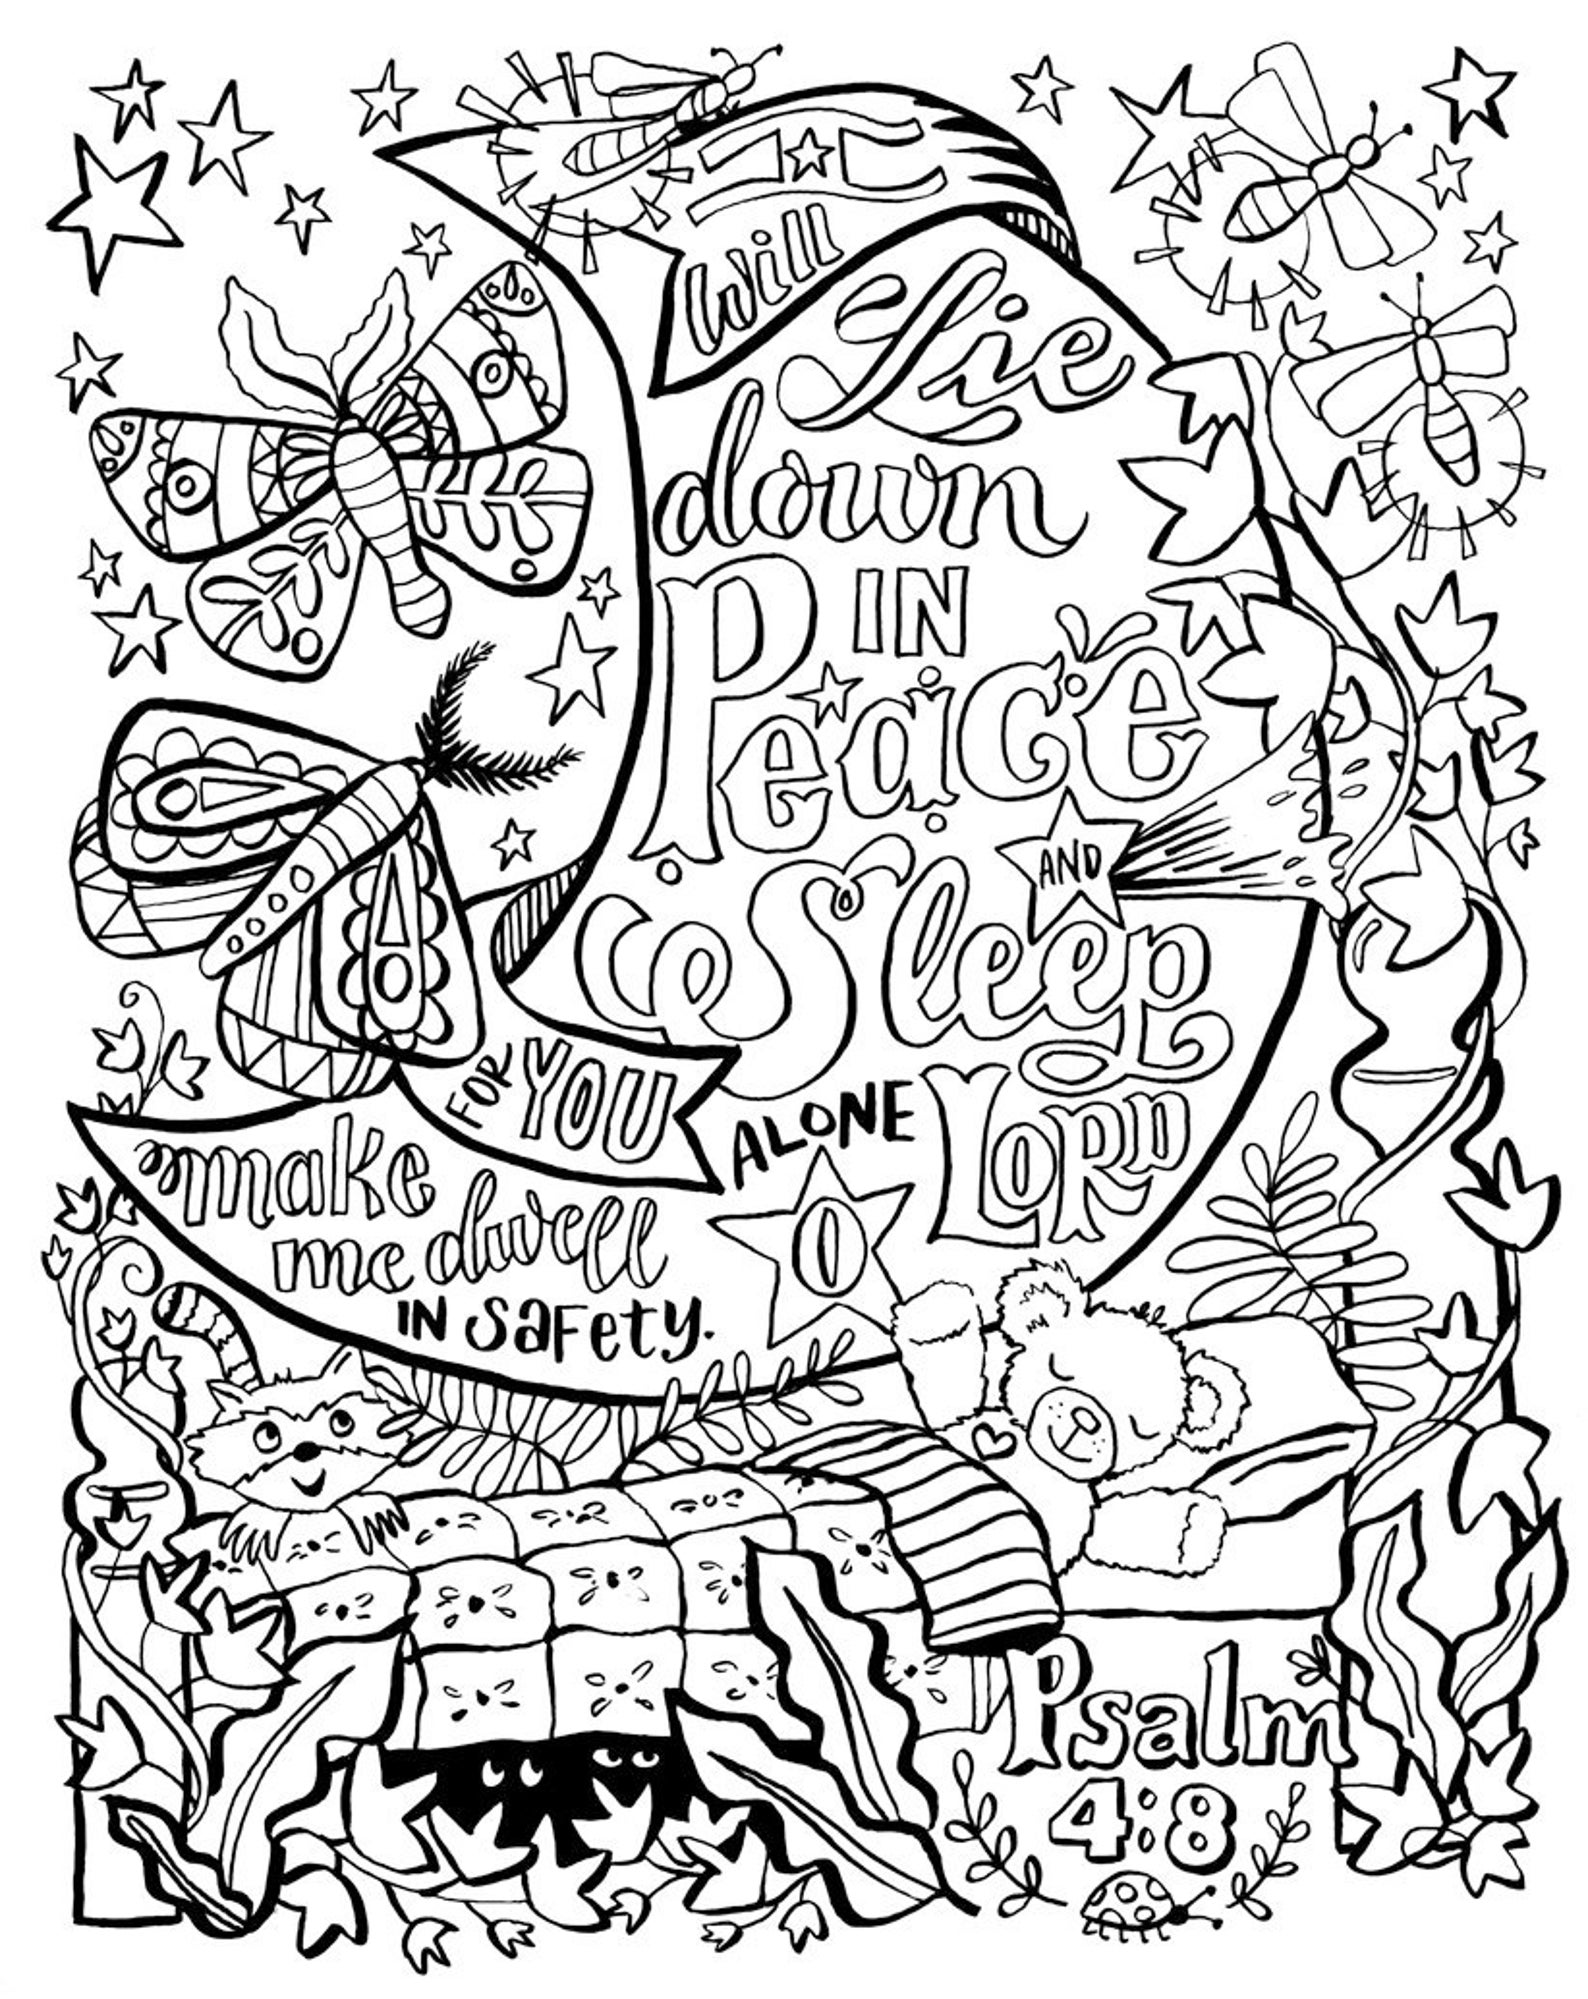 Coloring Page Bible Verse Lie Down in Peace Psalm 4 PDF DOWNLOAD - Etsy